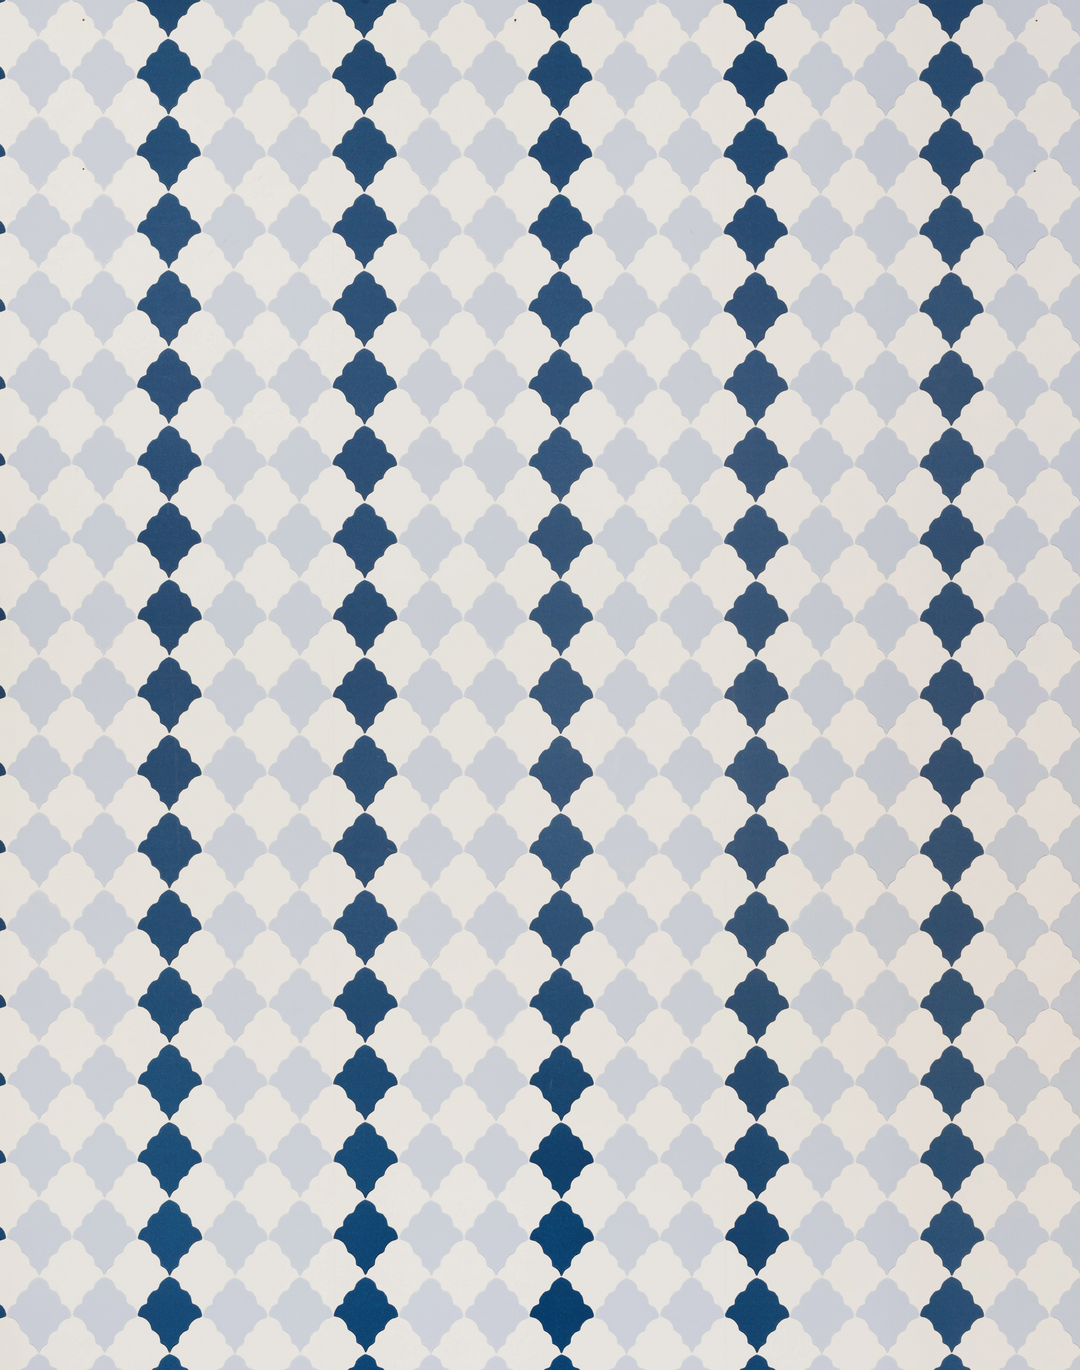 Quilted Harlequin, Two Blues